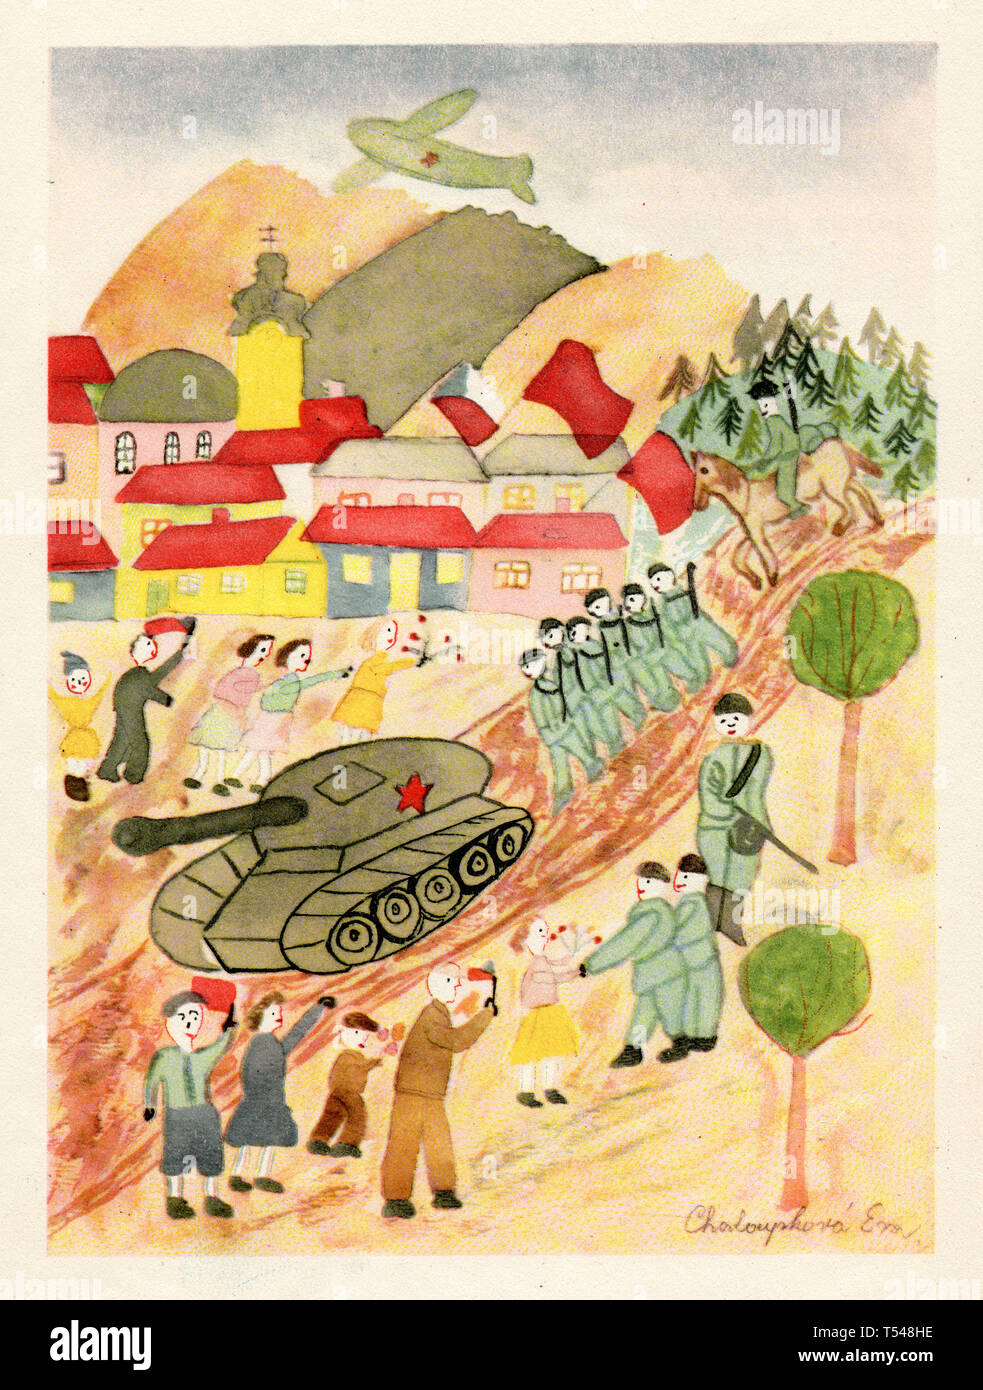 Liberation of Czechoslovakia by the Red Army in 1945 depicted in the child's drawing by 11-year-old girl Eva Chaloupková from the village of Čebín in South Moravia, Czechoslovakia, published in the Czechoslovak book 'How the Red Army Has Liberated Me' ('Jak mě osvododíla Rudá armada') dated from 1953. Stock Photo